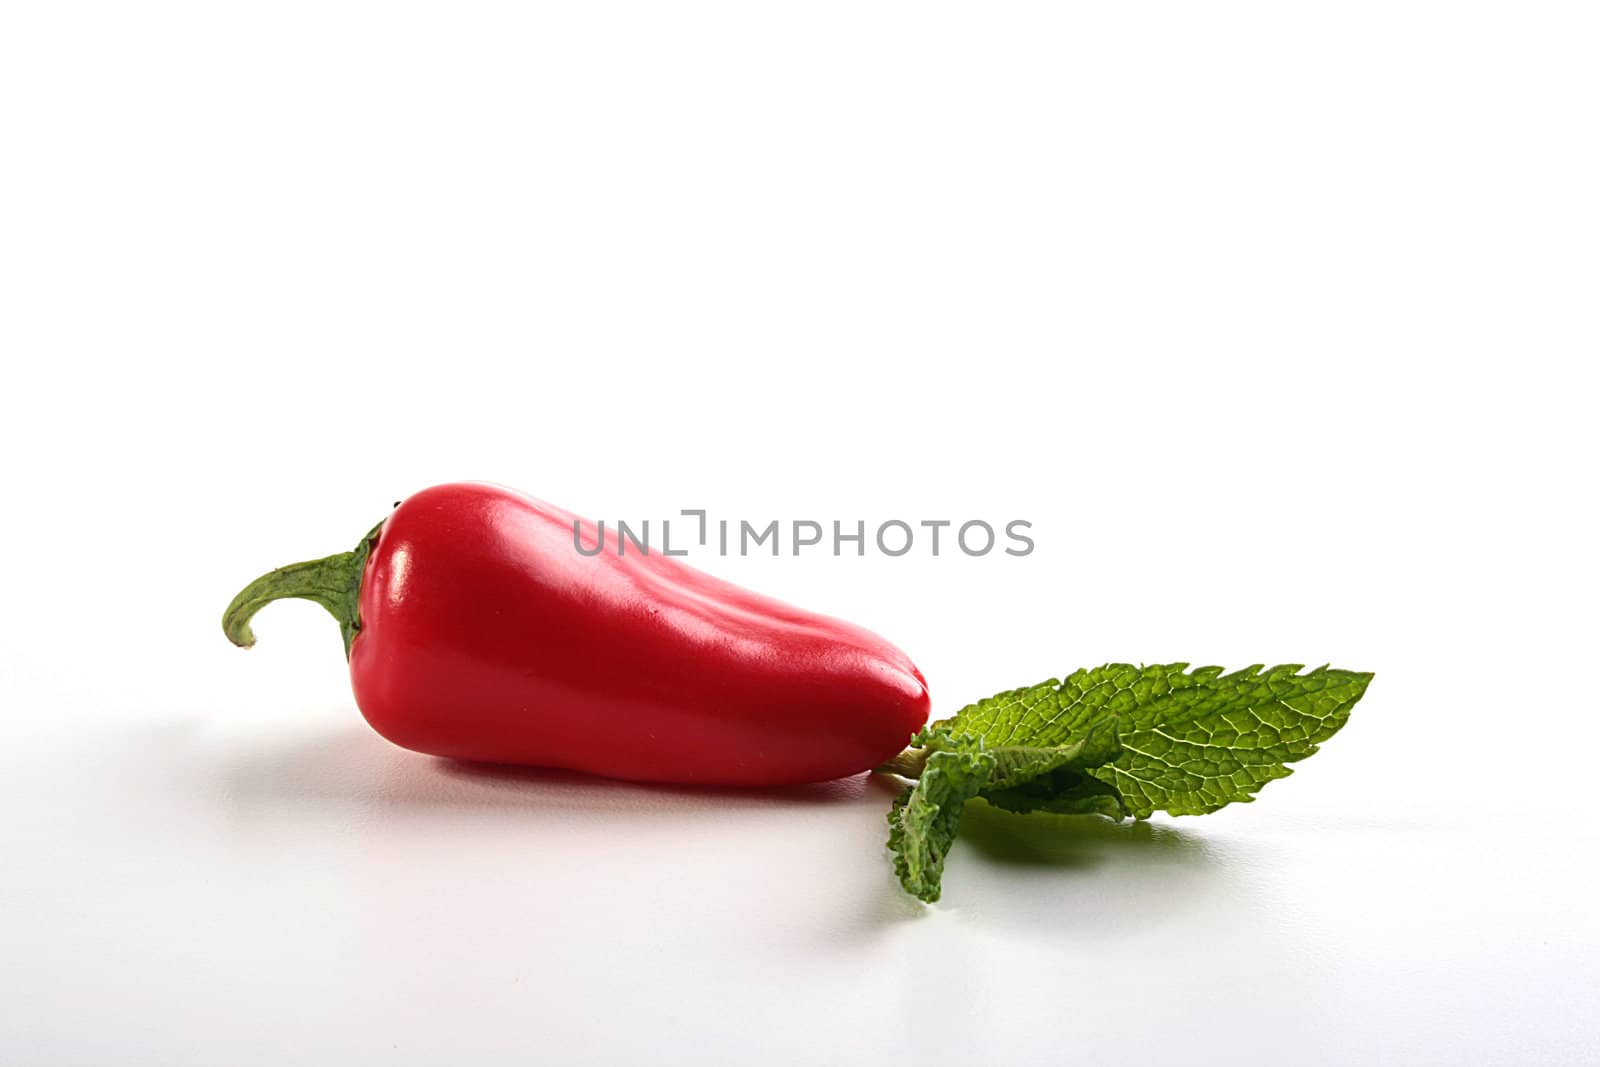 Hot red pepper with a basil leaf on a white table.